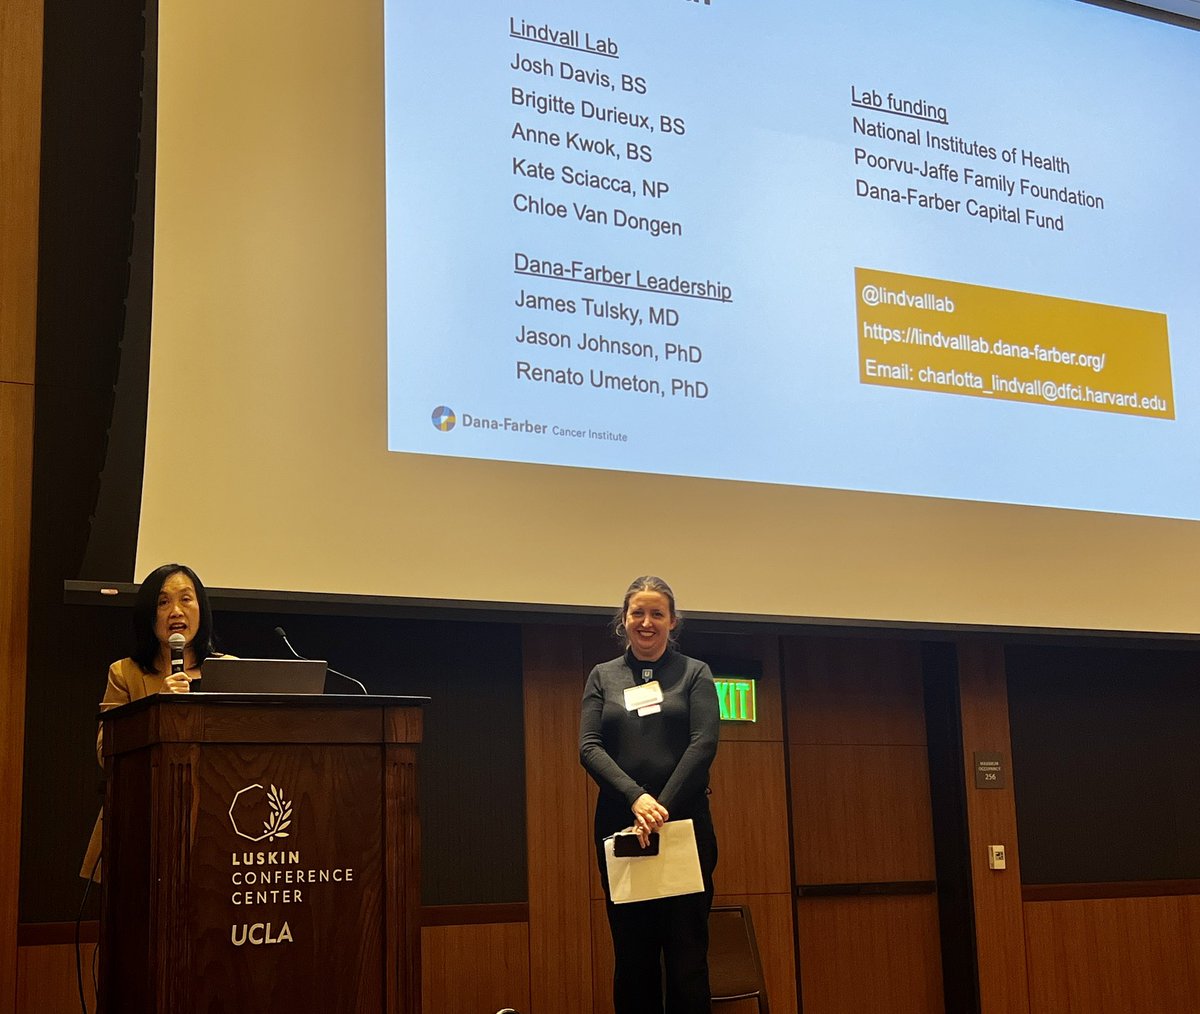 . @DrZhaopingLi) and @DrAnneMWalling close this evening’s #palliativecareresearch symposium. We at UCLA’s DoM are committed to improving palliative care for all patients, and are grateful to the experts who spoke today for leading the way. @UCLAPalliative